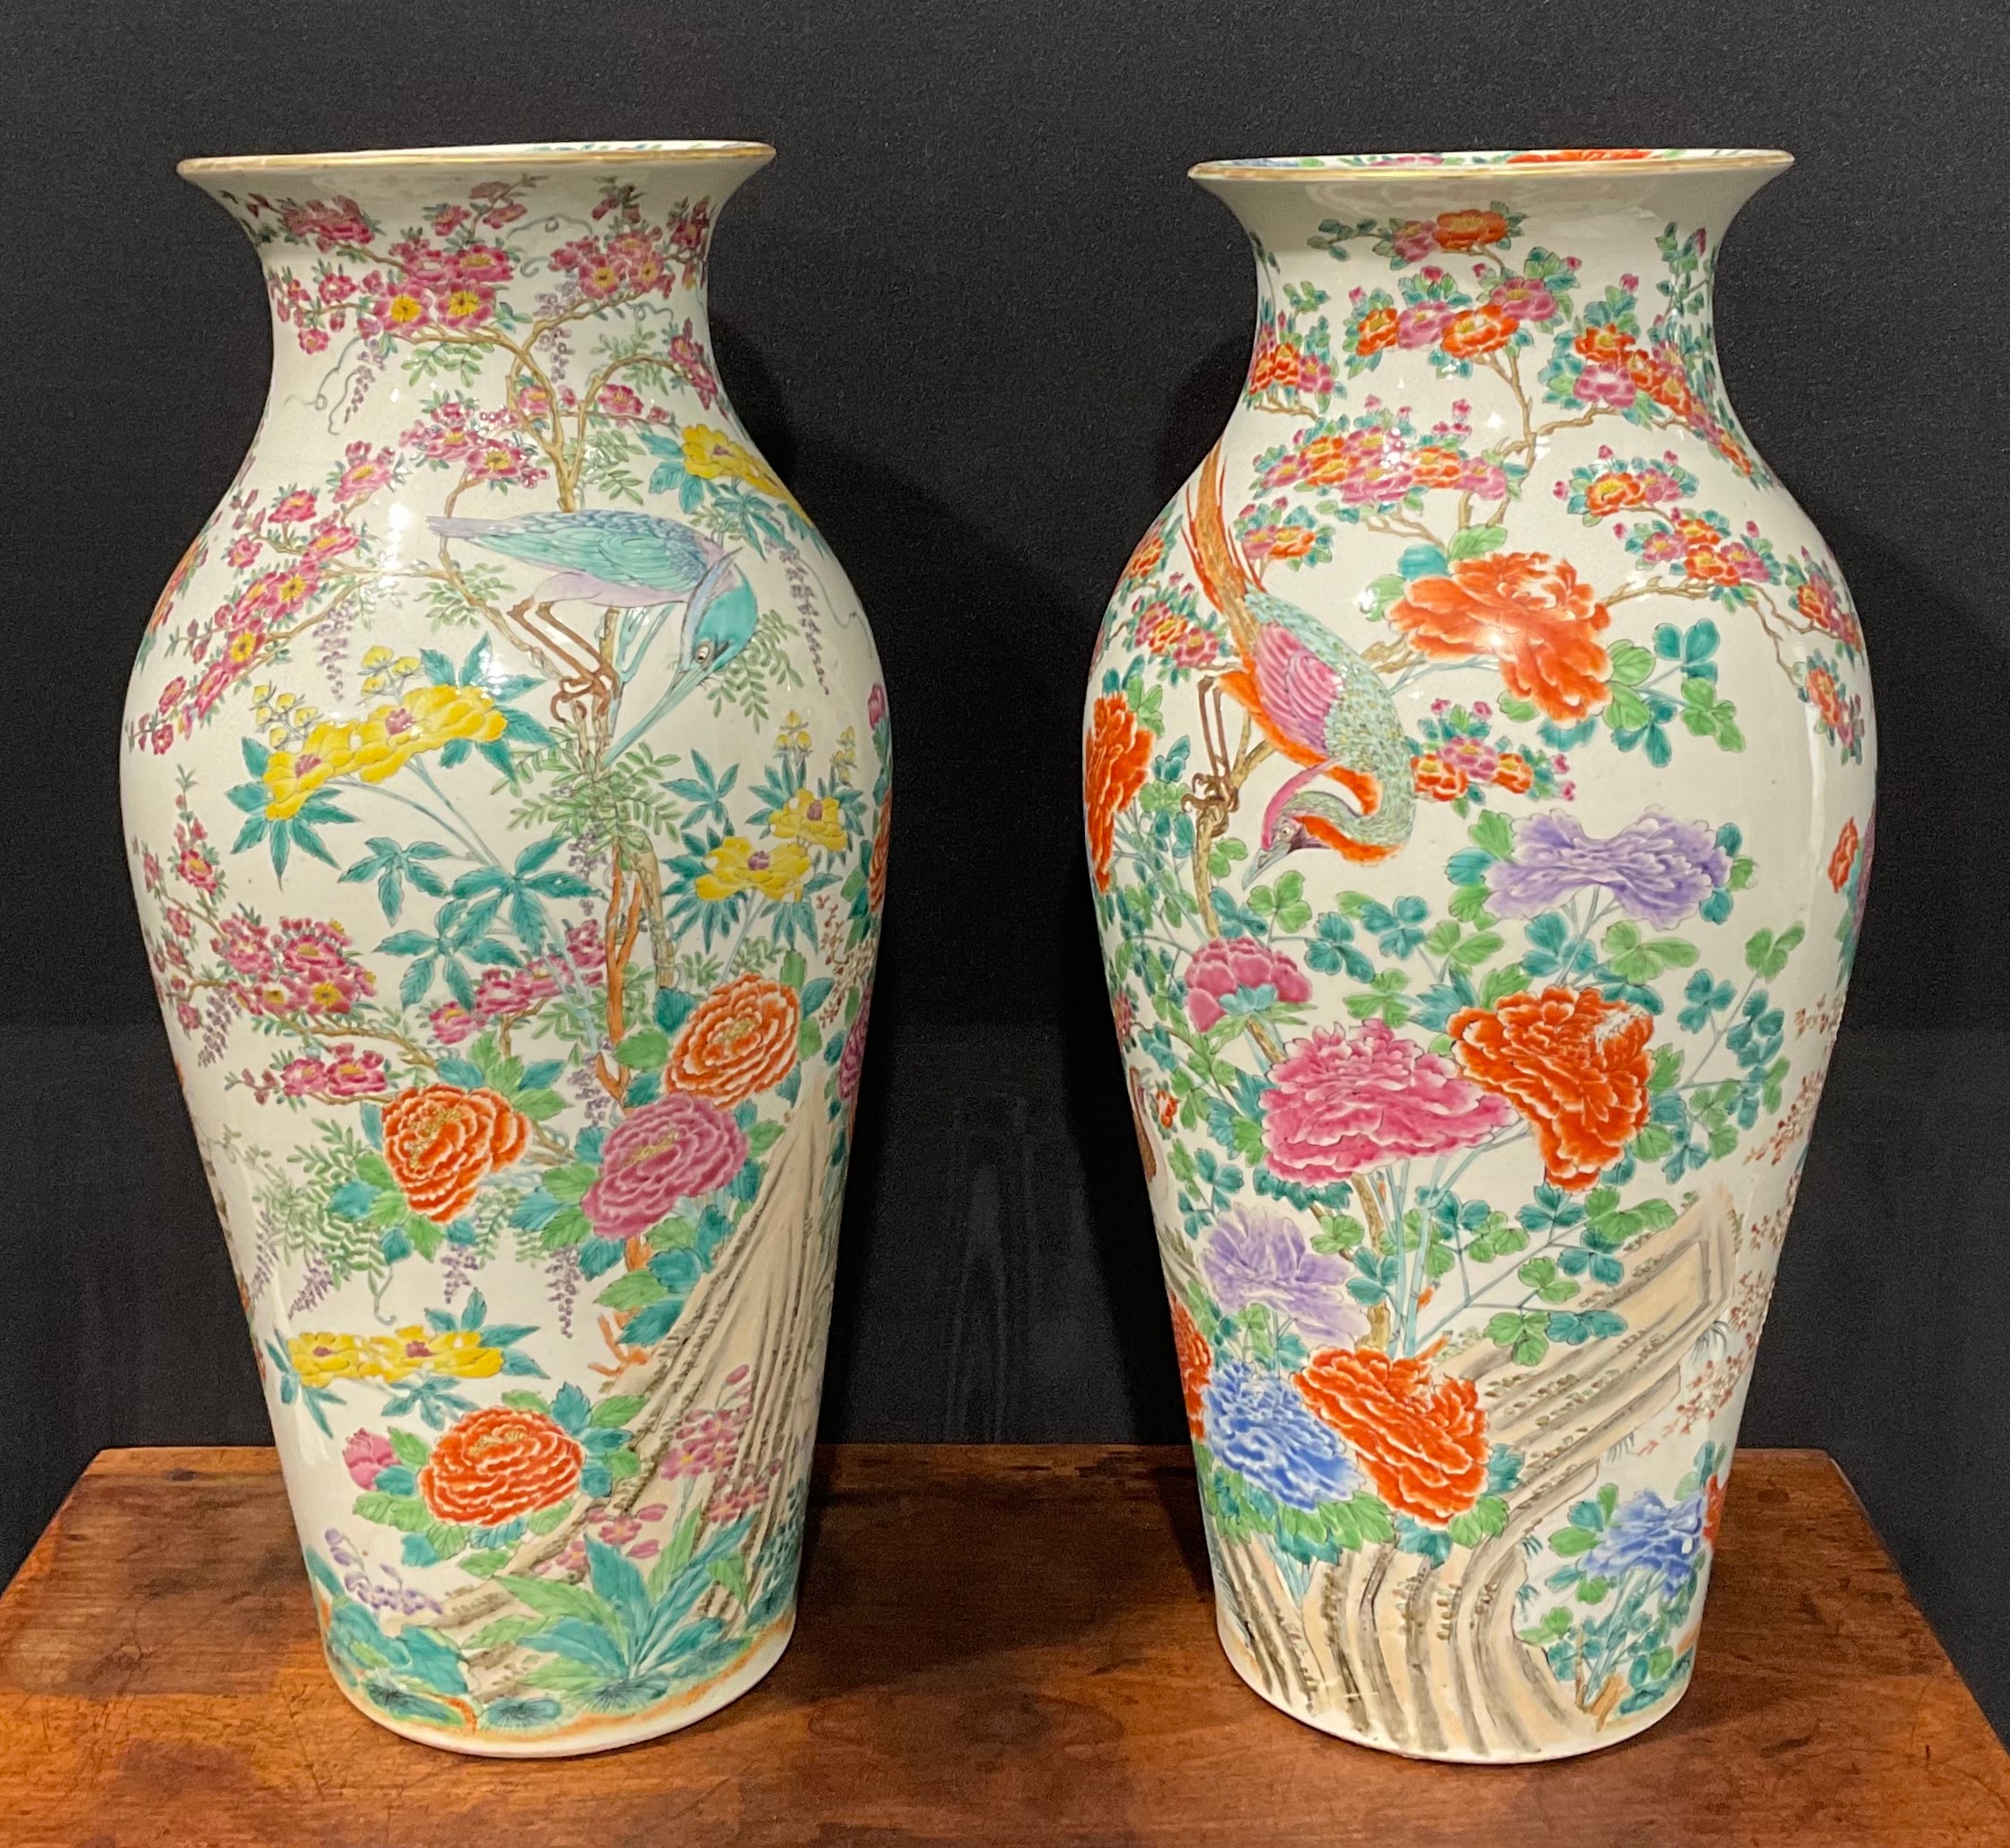 A pair of large Japanese inverted baluster vases, decorated in the Chinese manner with exotic